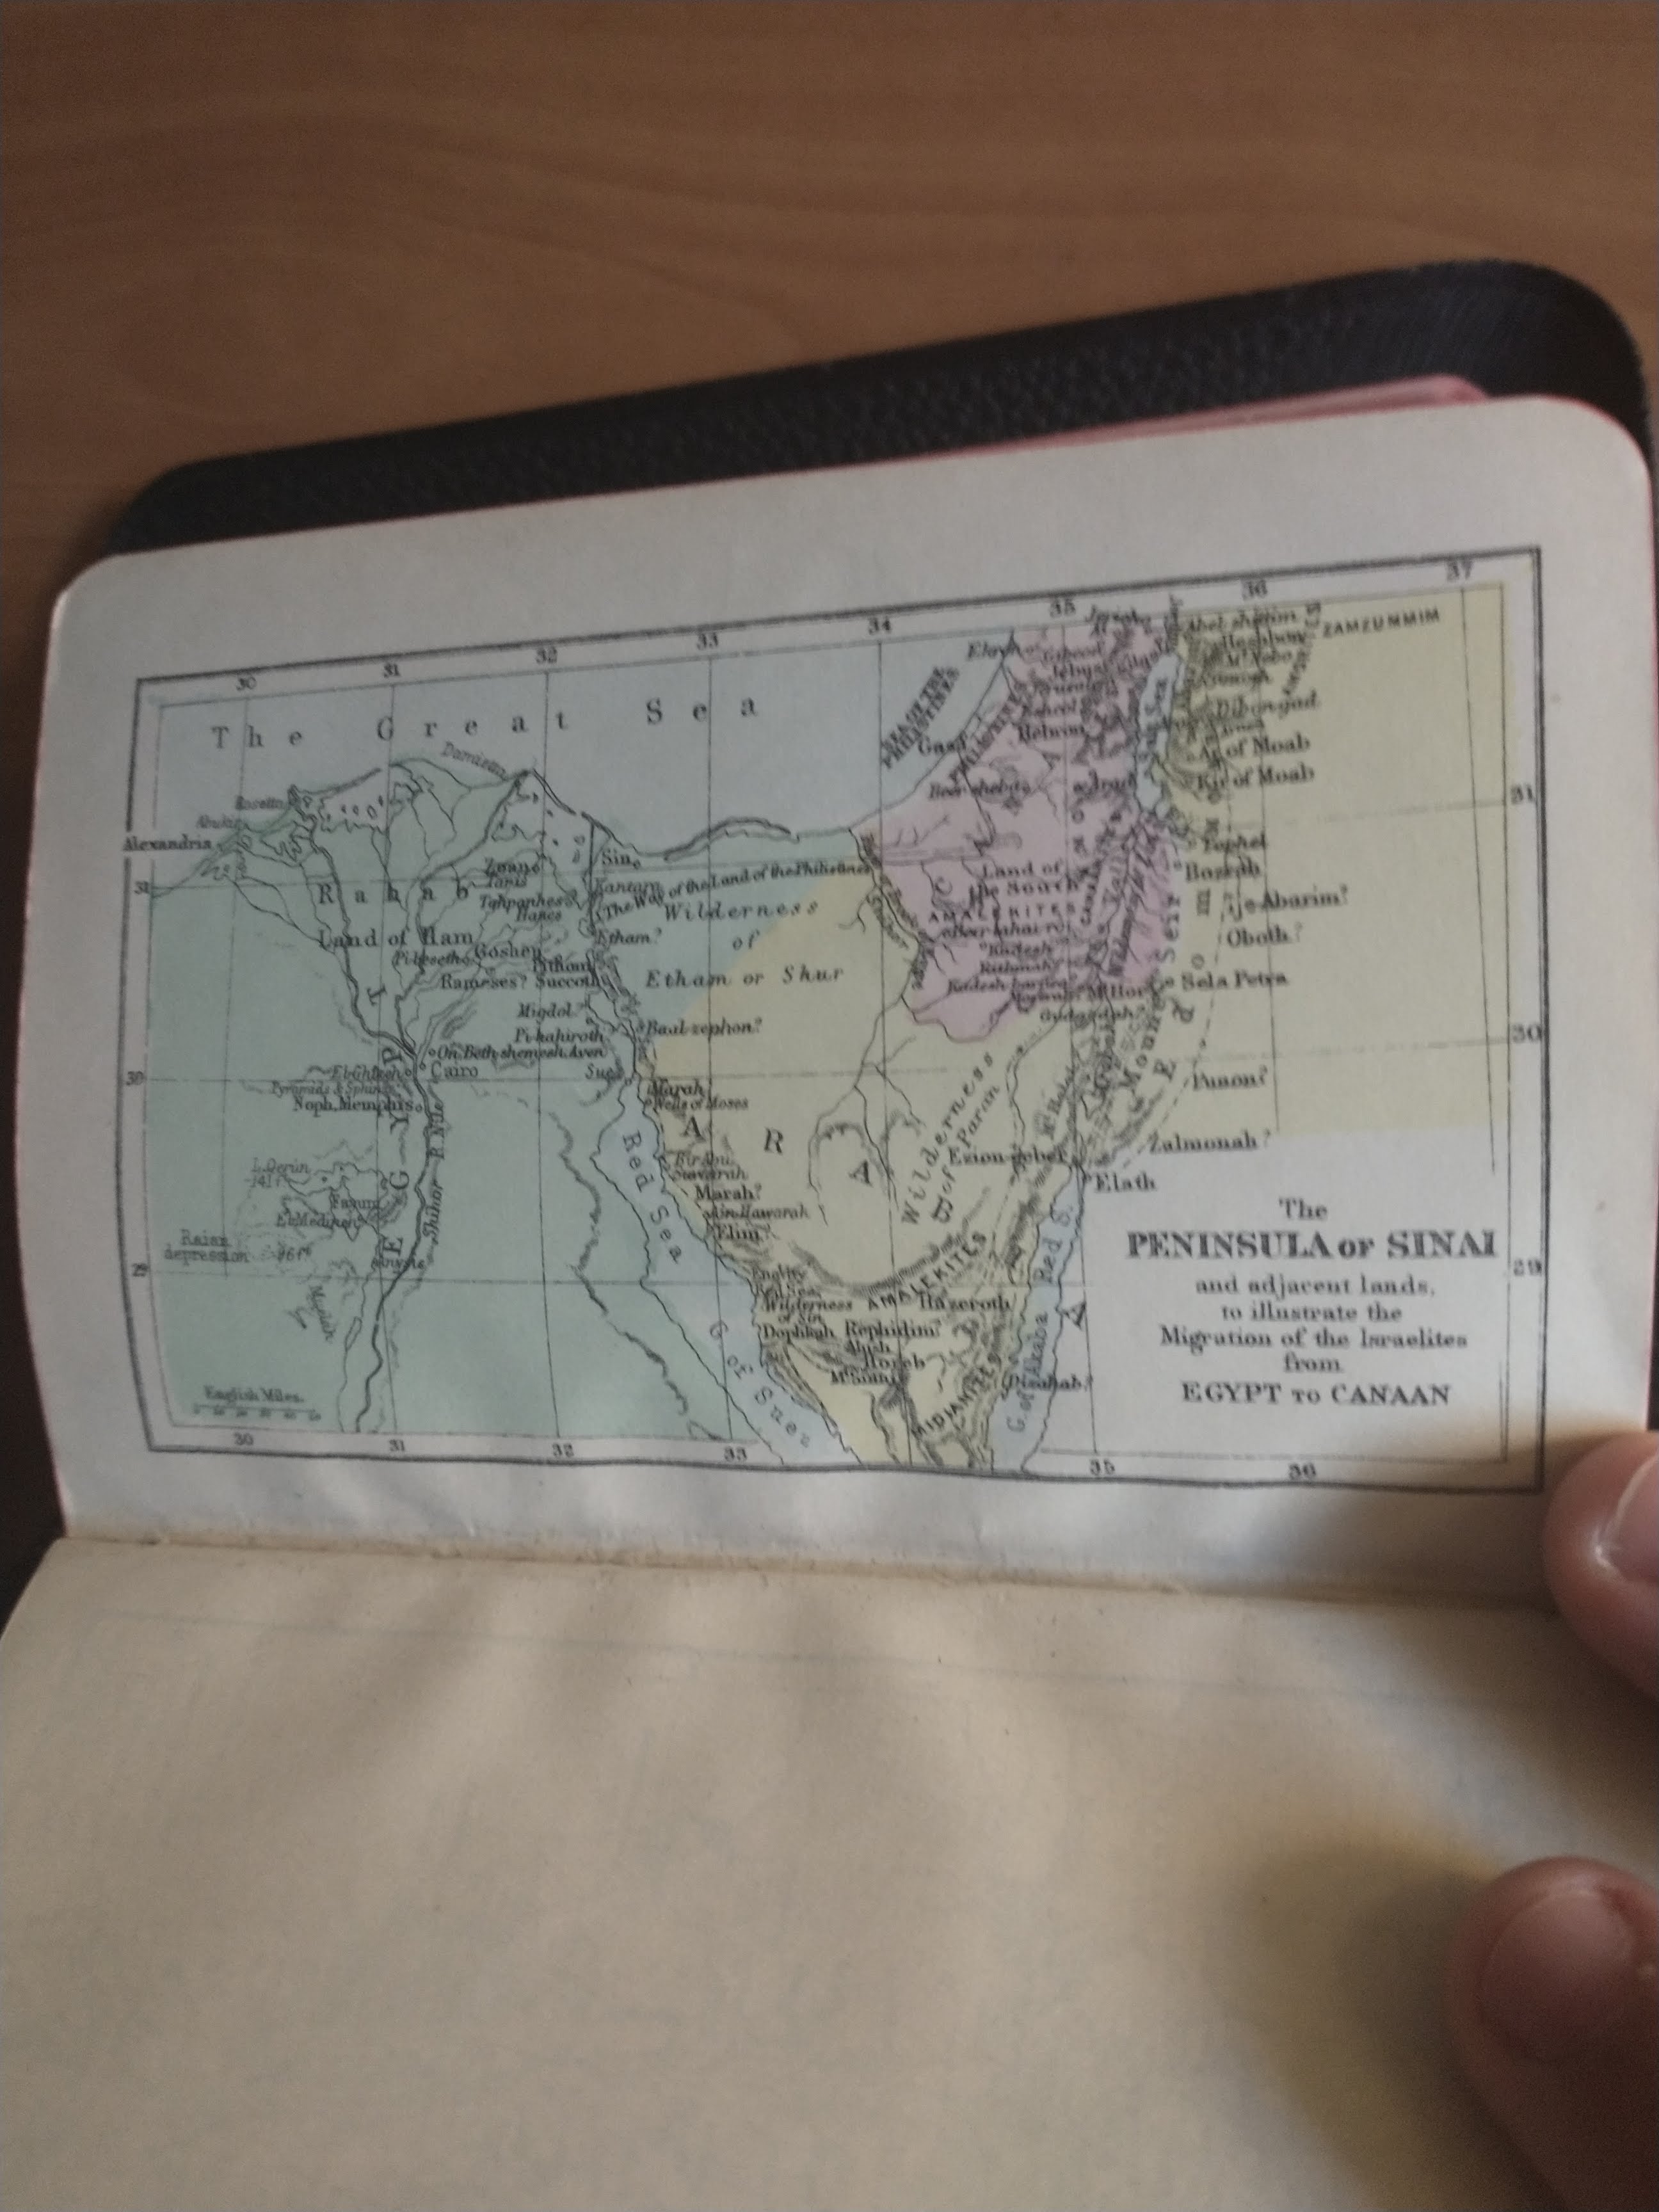 The Bible is open to the last page. Unlike the previous pages, it is open horizontally. It shows a colored map of modern-day Egypt, Israel, and surrounding regions, centered on the Sinai Peninsula. The title of the map reads "The Peninsula Of Sinai and adjacent lands, to illustrate the Migration of the Israelites from EGYPT to CANAAN". The picture is slightly blurry, making it hard to read all of the text detailing various cities and points of interest on the map. The map appears to list both where modern-day cities are located, as well as where different groups of people are thought to have lived at some point; for example, the Nile Delta is labeled with "Land of Ham". The Mediterranean Sea is labeled as "The Great Sea". There are latitude lines labeled from 28 to 32, and longitude lines from 29 to 37.